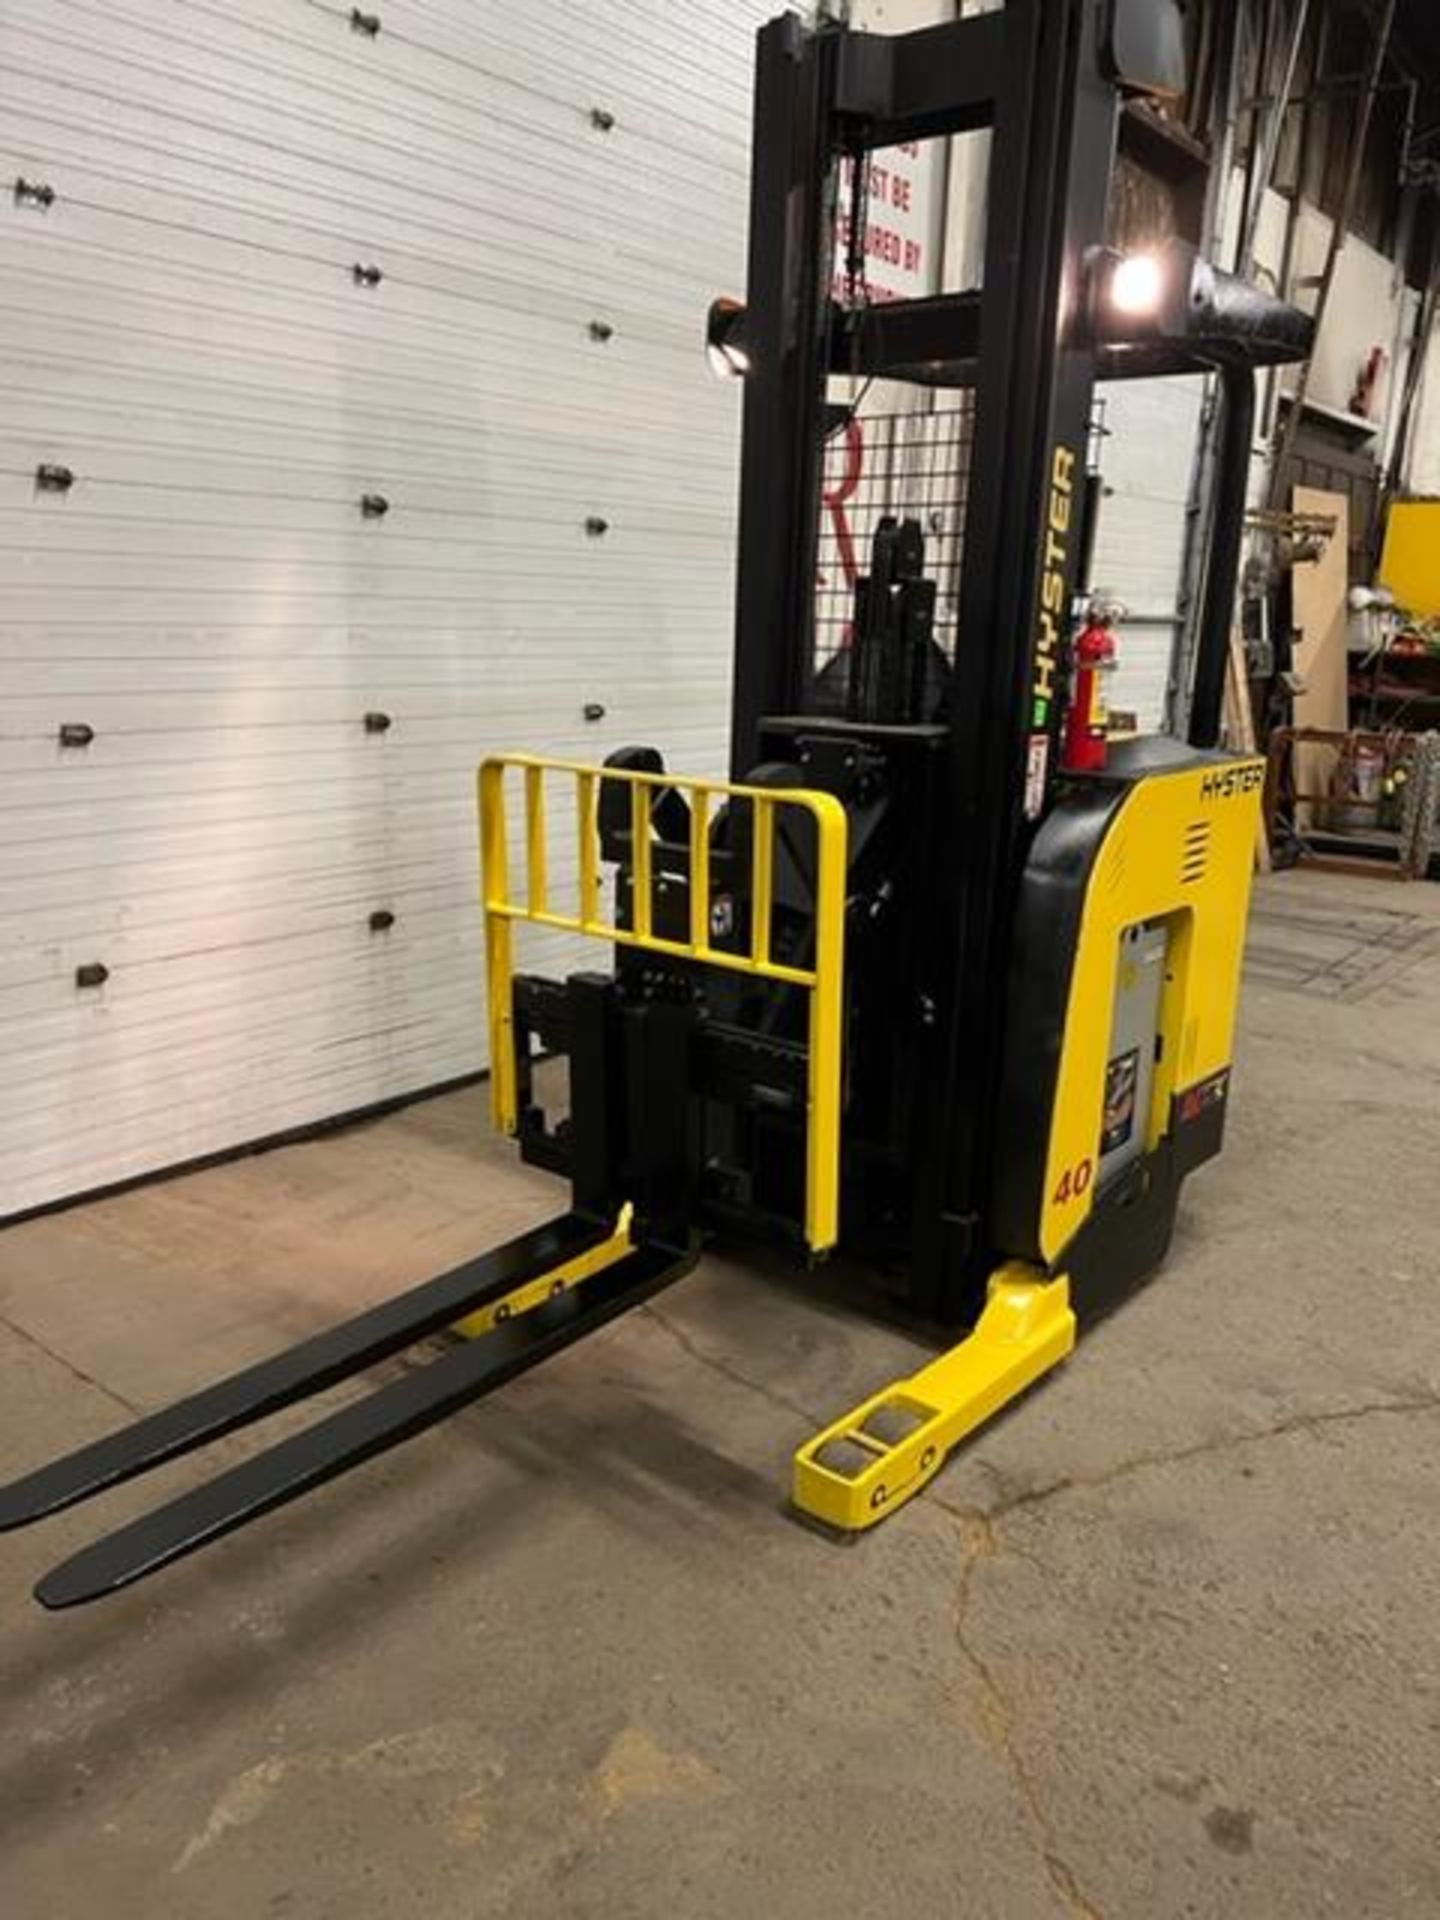 FREE CUSTOMS - 2011 Hyster Reach Truck Pallet Lifter REACH TRUCK 4000lbs capacity electric MINT - Image 2 of 3